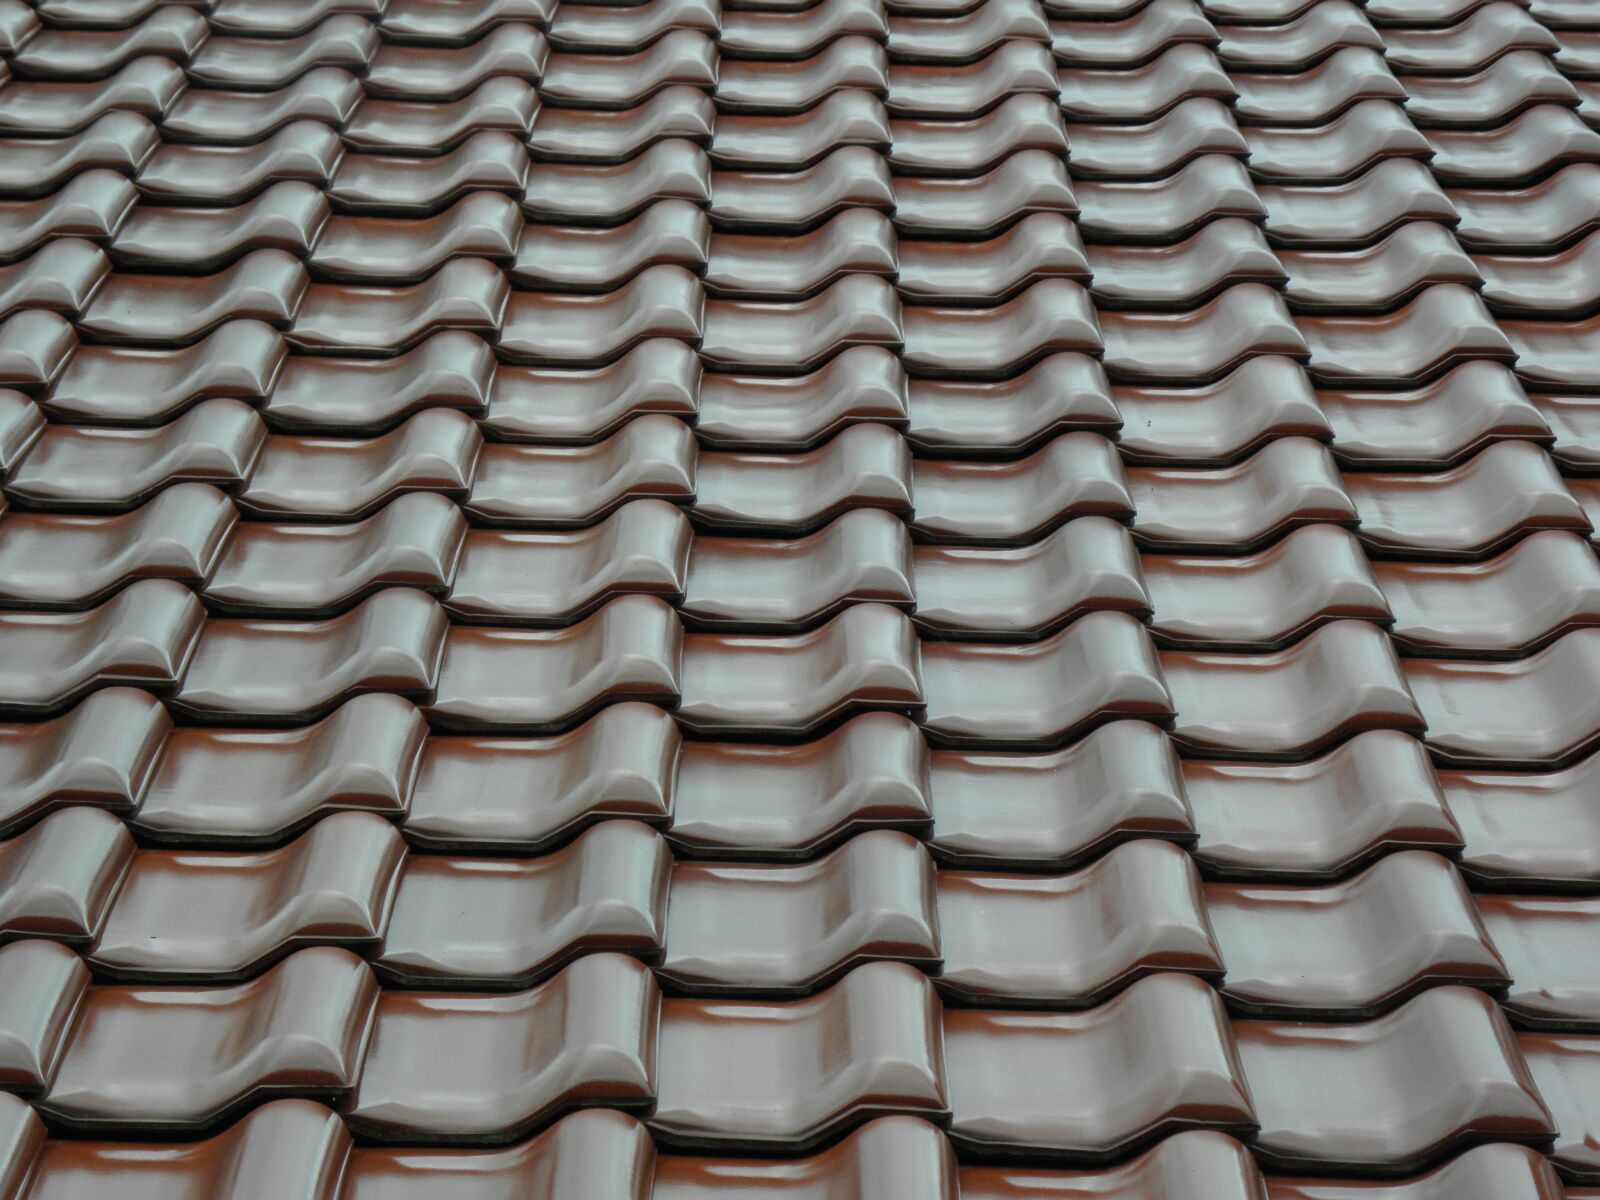 Olympus SP590UZ sample photo. The roof of the photography